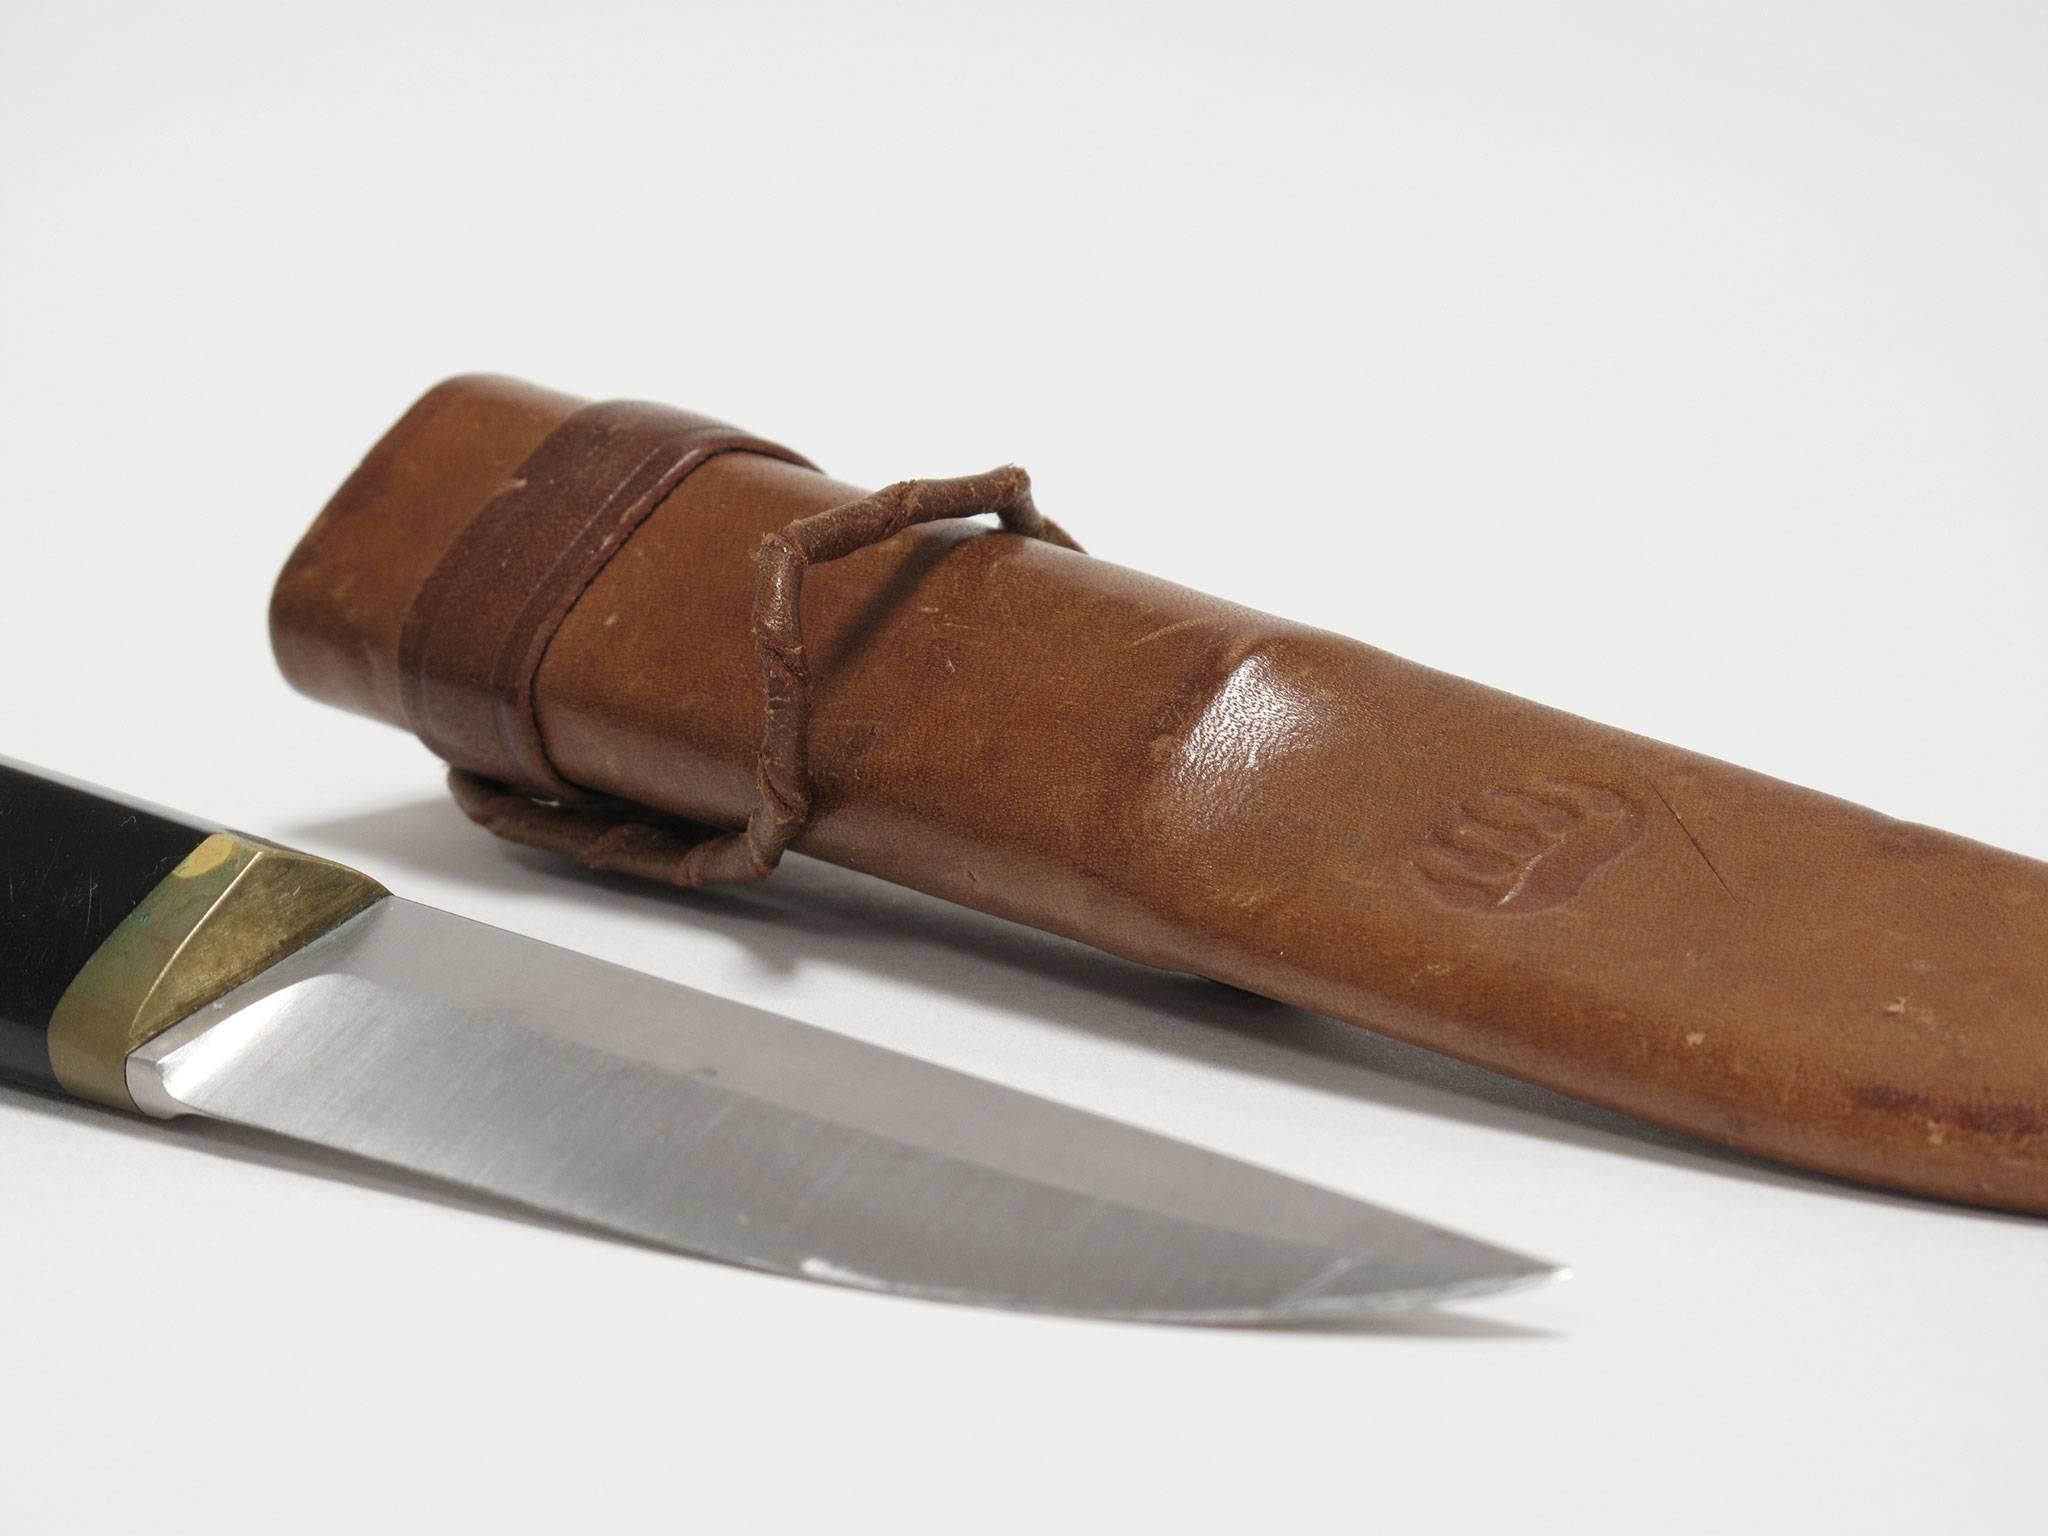 Tapio Wirkkala
'Puukko' knife and leather sheath, 1960s
Hackman Cutlery, Finland
1.25 high x 9 wide x 1.25 deep inches

The blade is made from stainless steel, the bolster and pommel are brass and the handle is black nylon. The leather sheath is